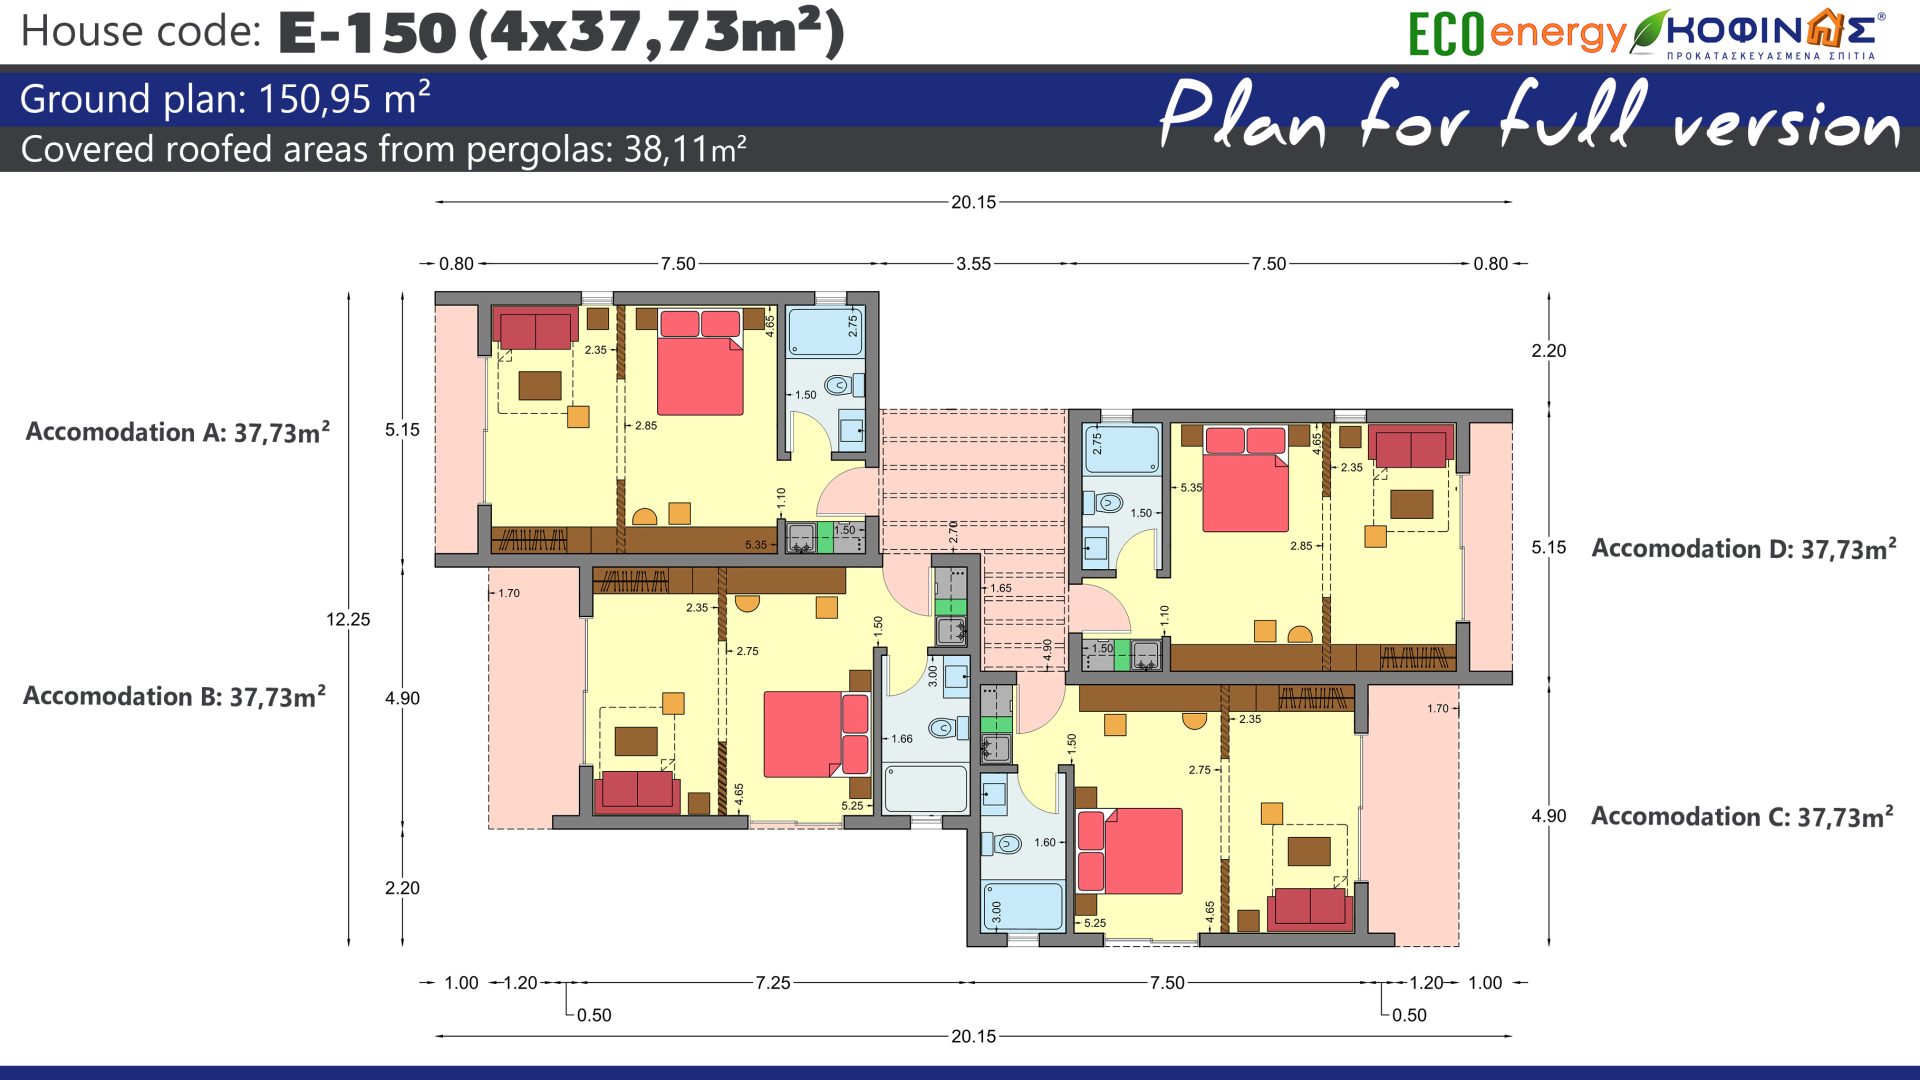 1 Storey Complex E-150, total surface of 4 x 37,73 = 150,95 m²,covered areas 38,11 m²